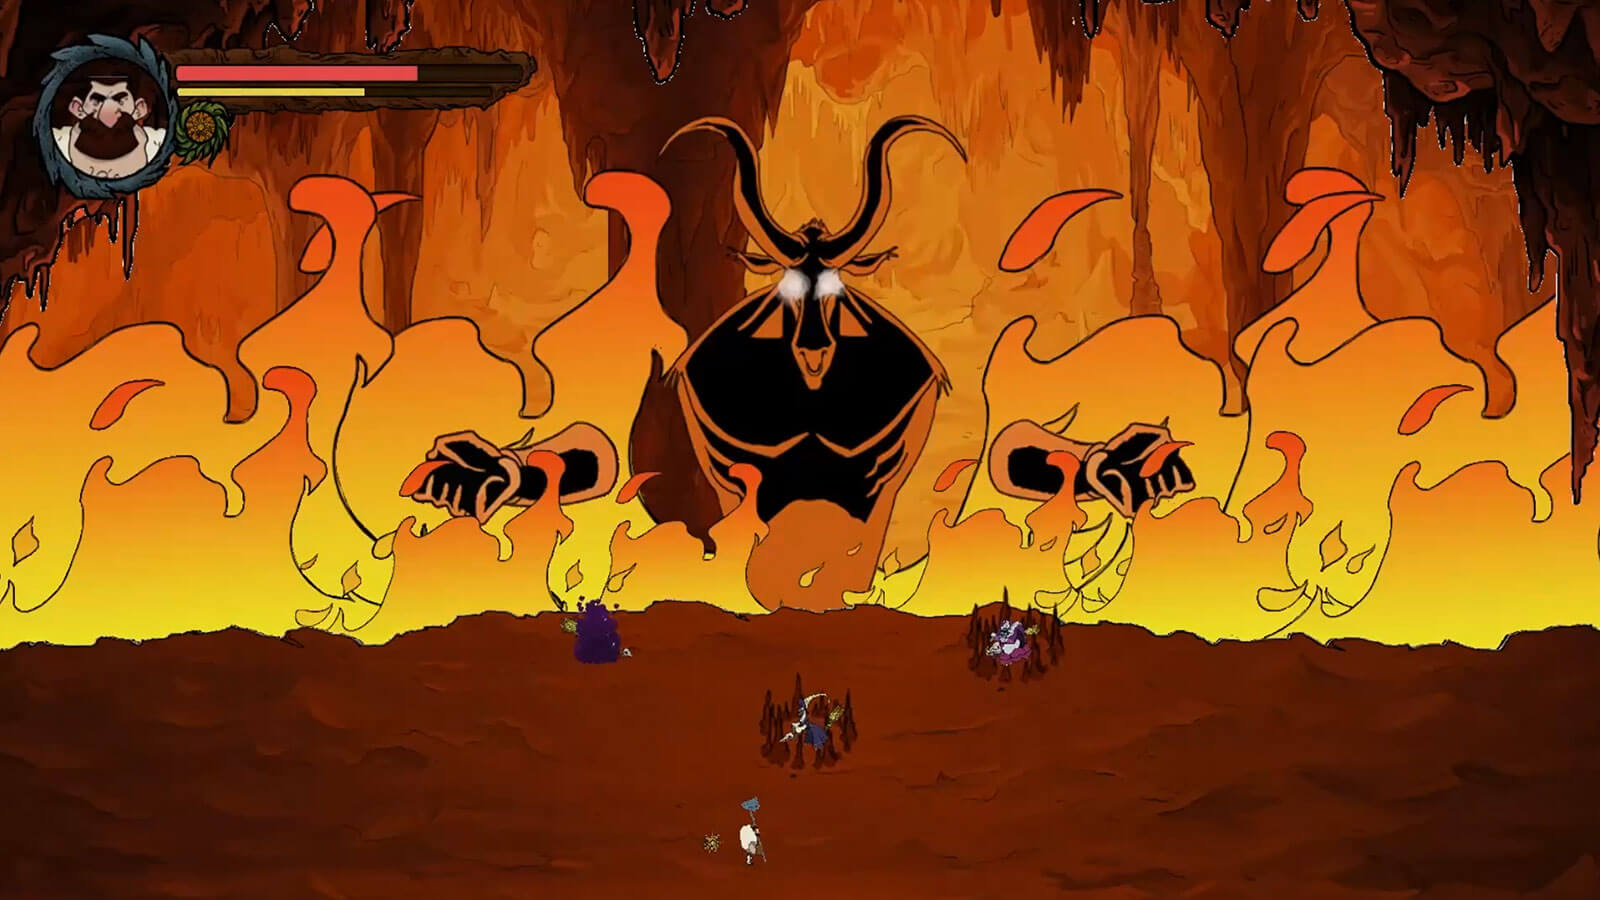 A massive fiery demon towers above a player on a platform